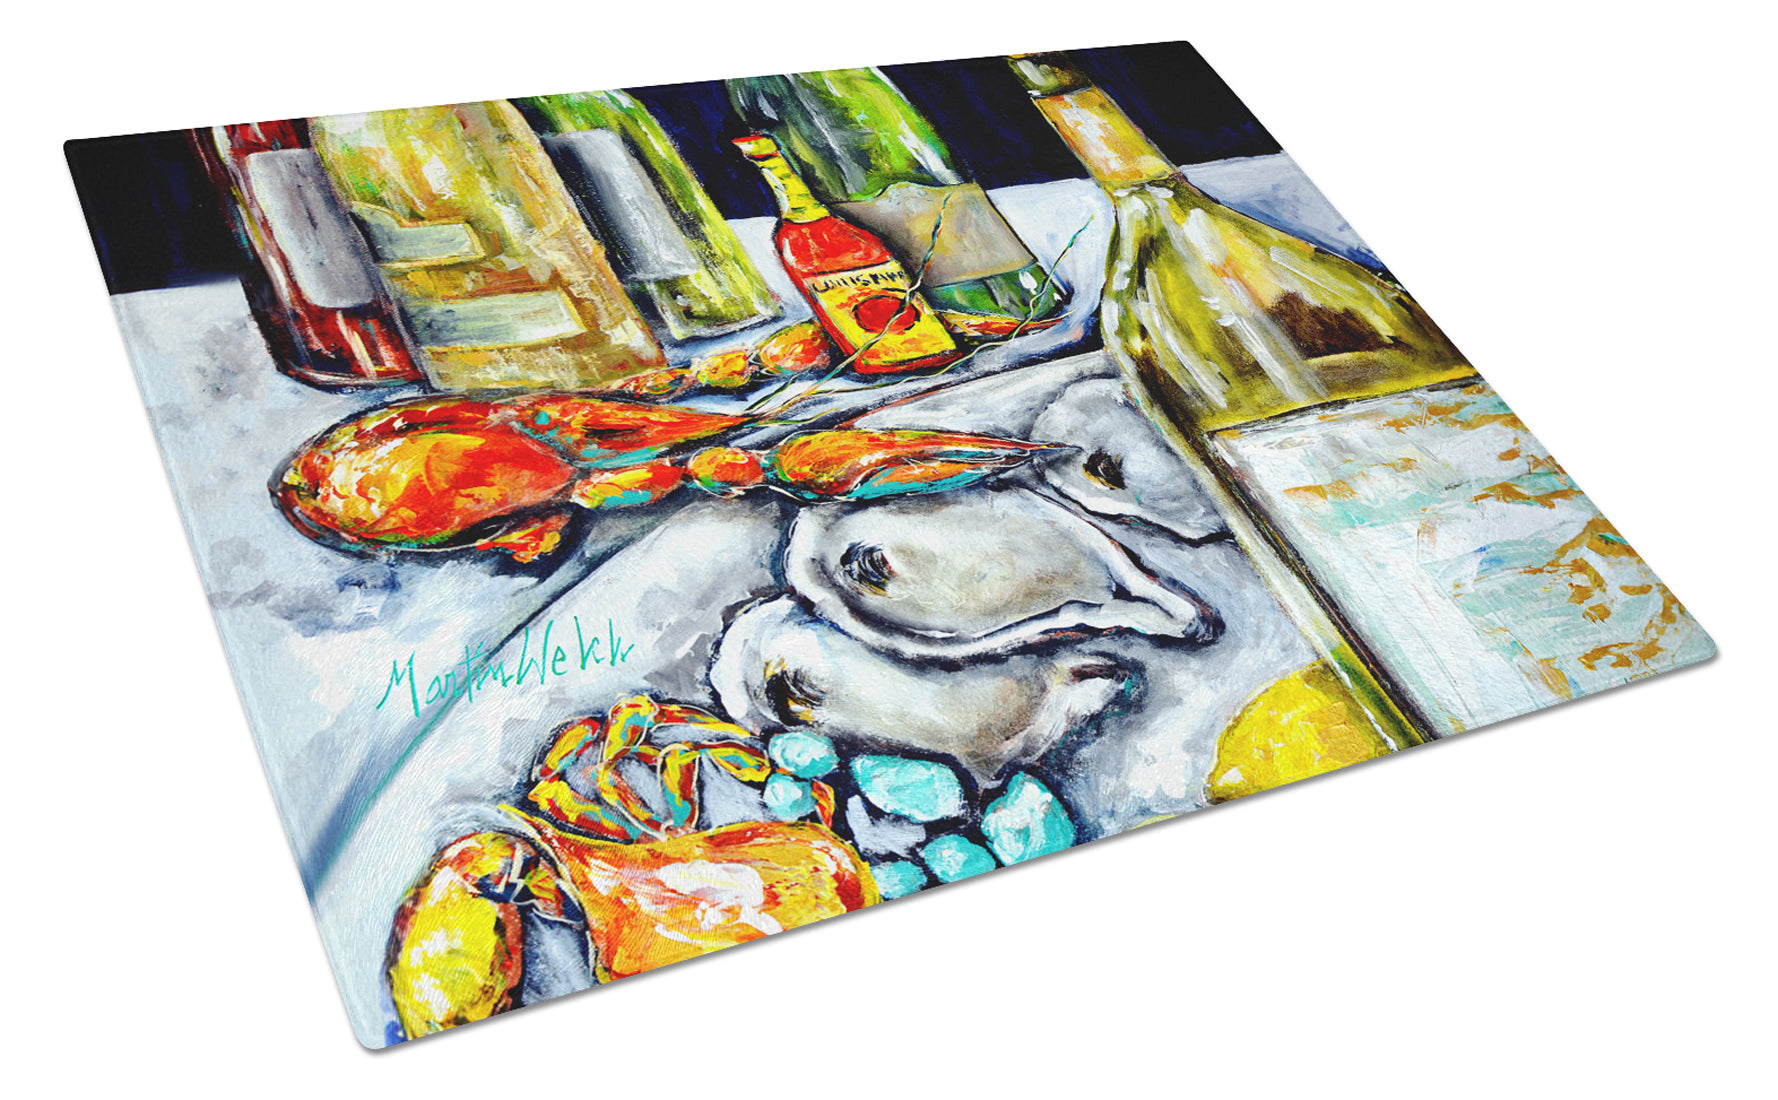 Buy this Sit A Spell Seafood Dinner Glass Cutting Board